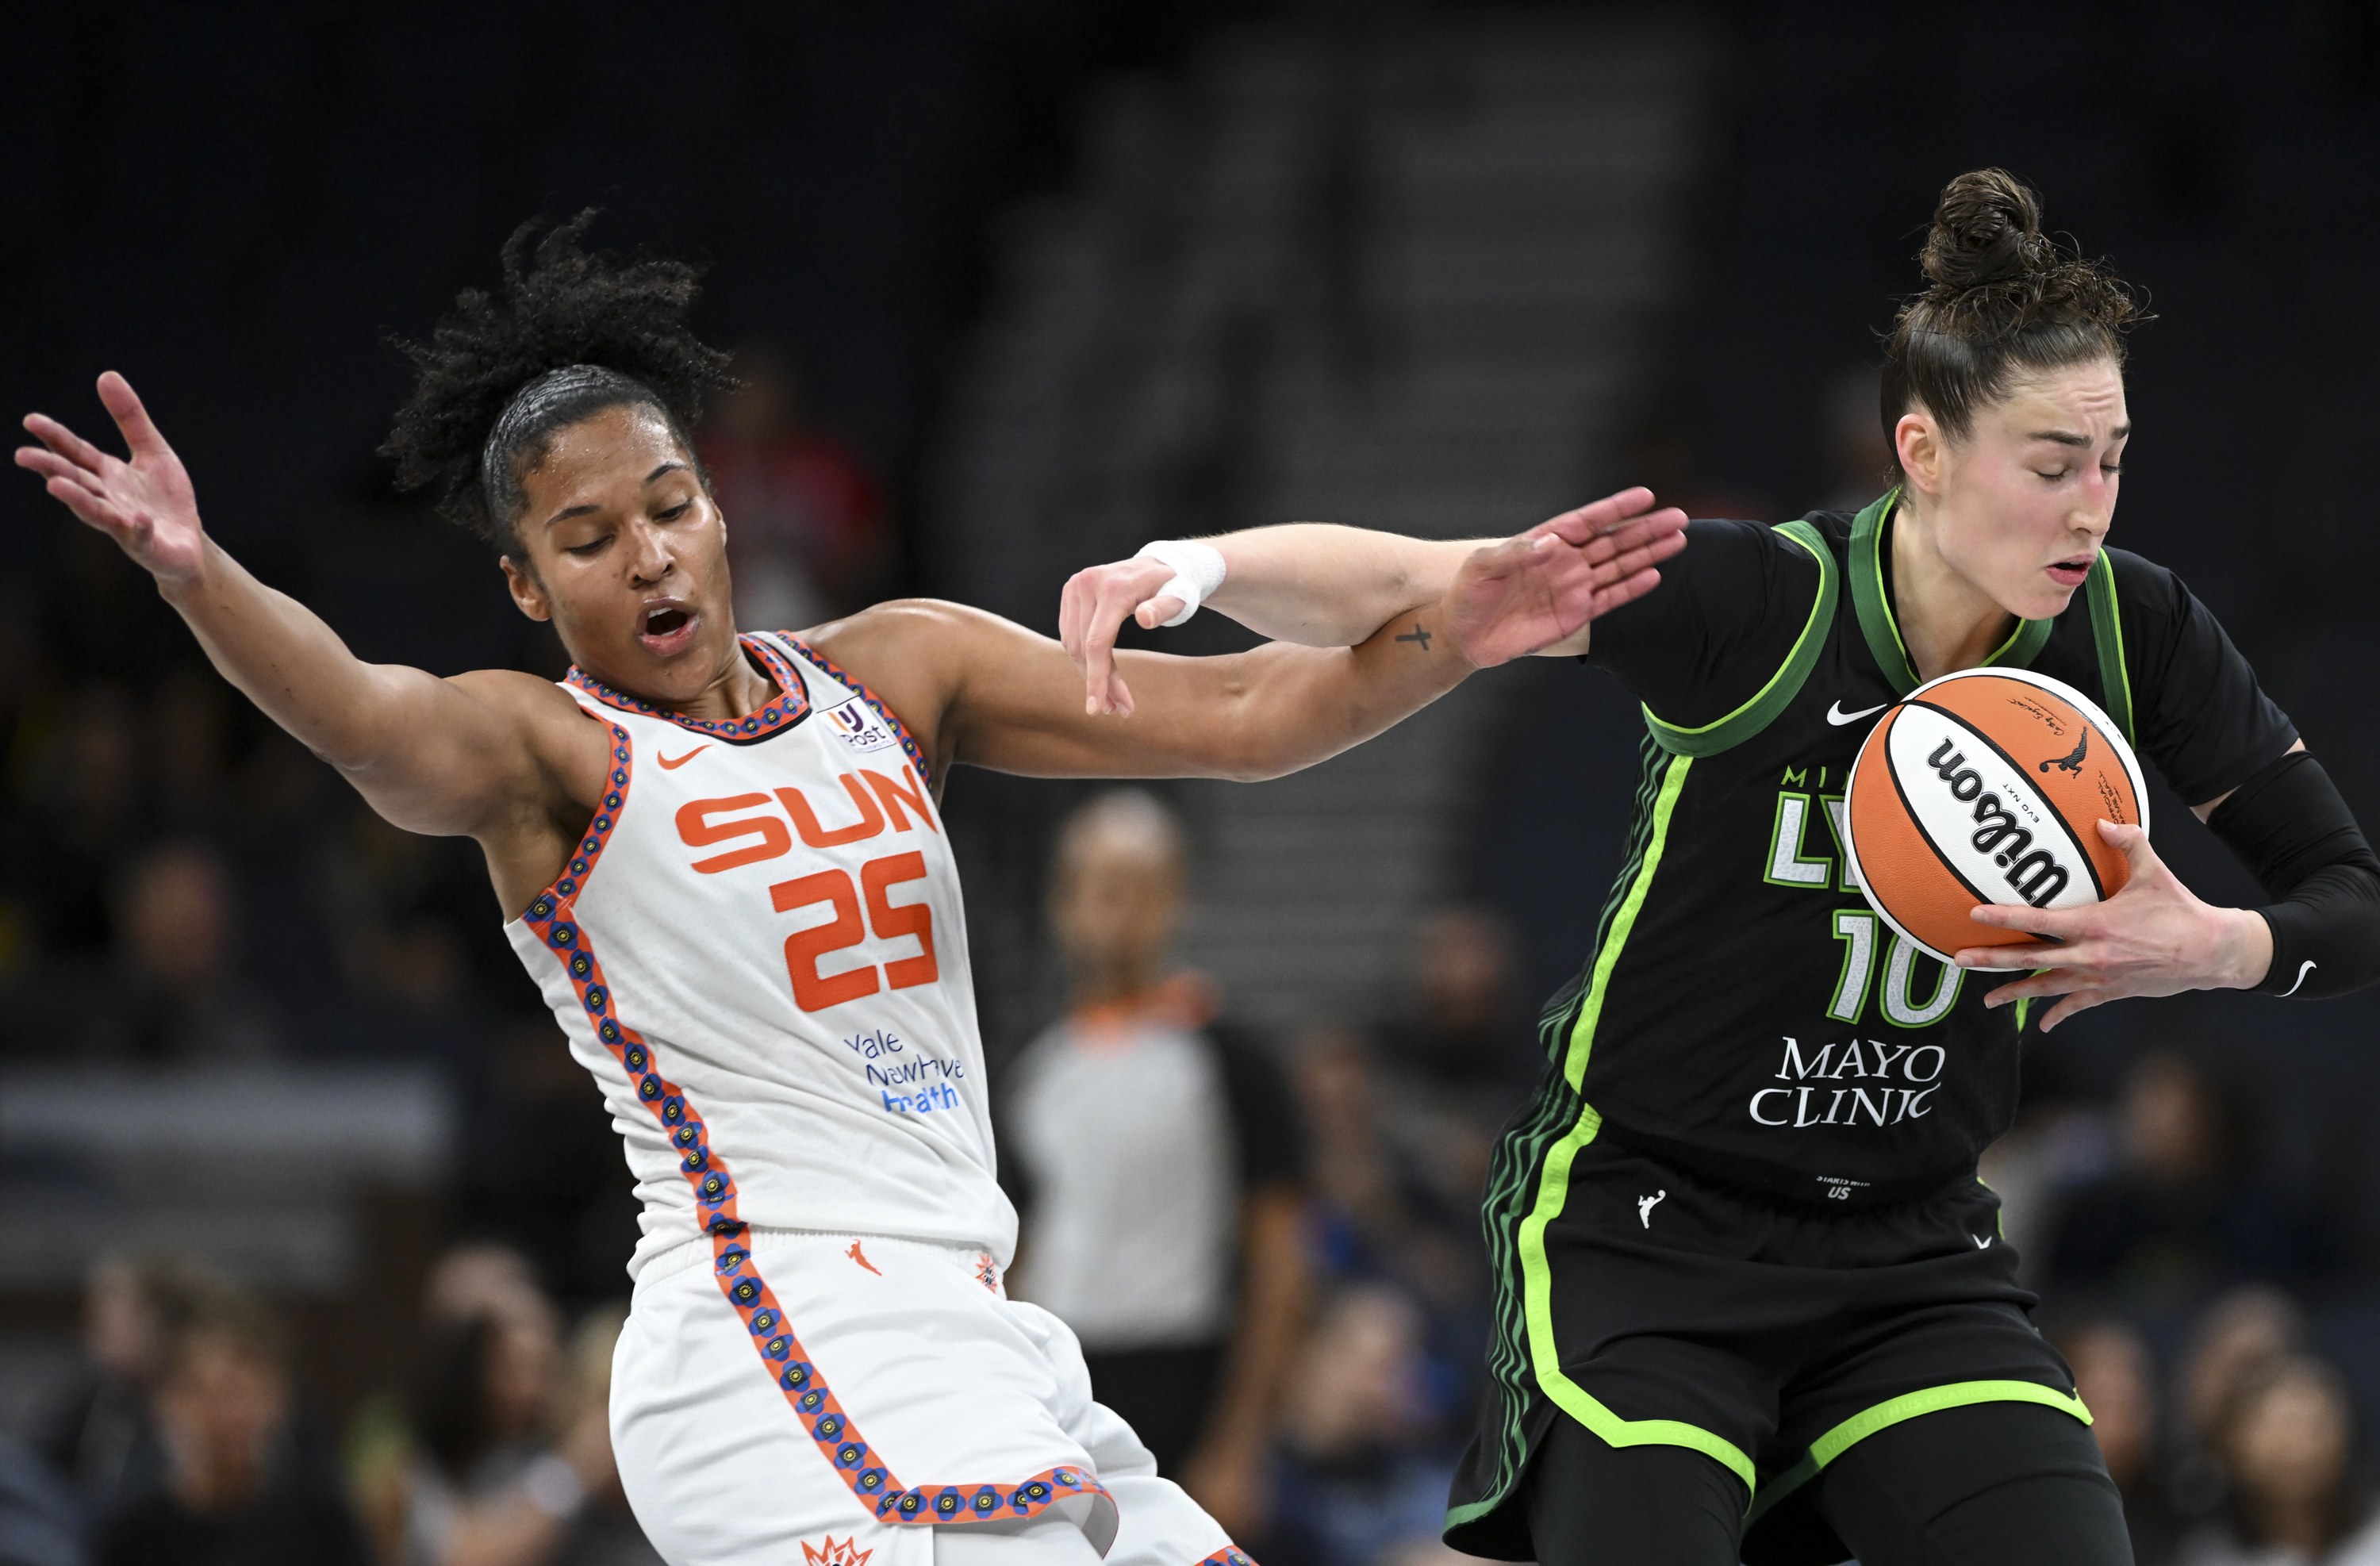 How to stream the WNBA in 2023: Tip-off weekend schedule, TV channels,  where to watch online 